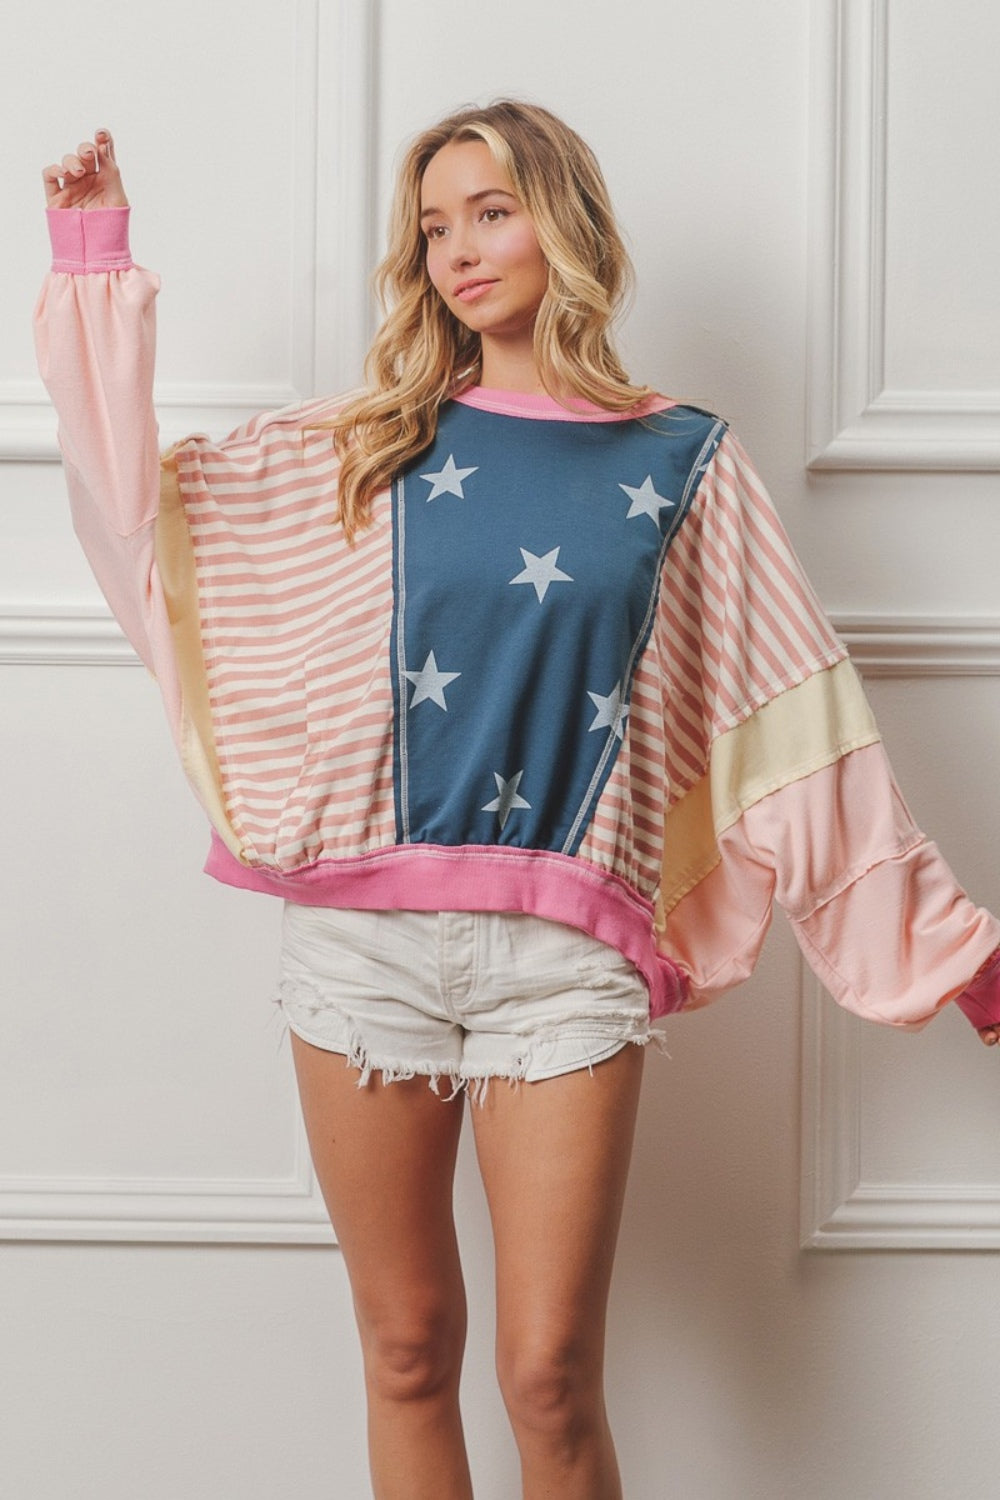 Stars by Night Stripes by Day Top